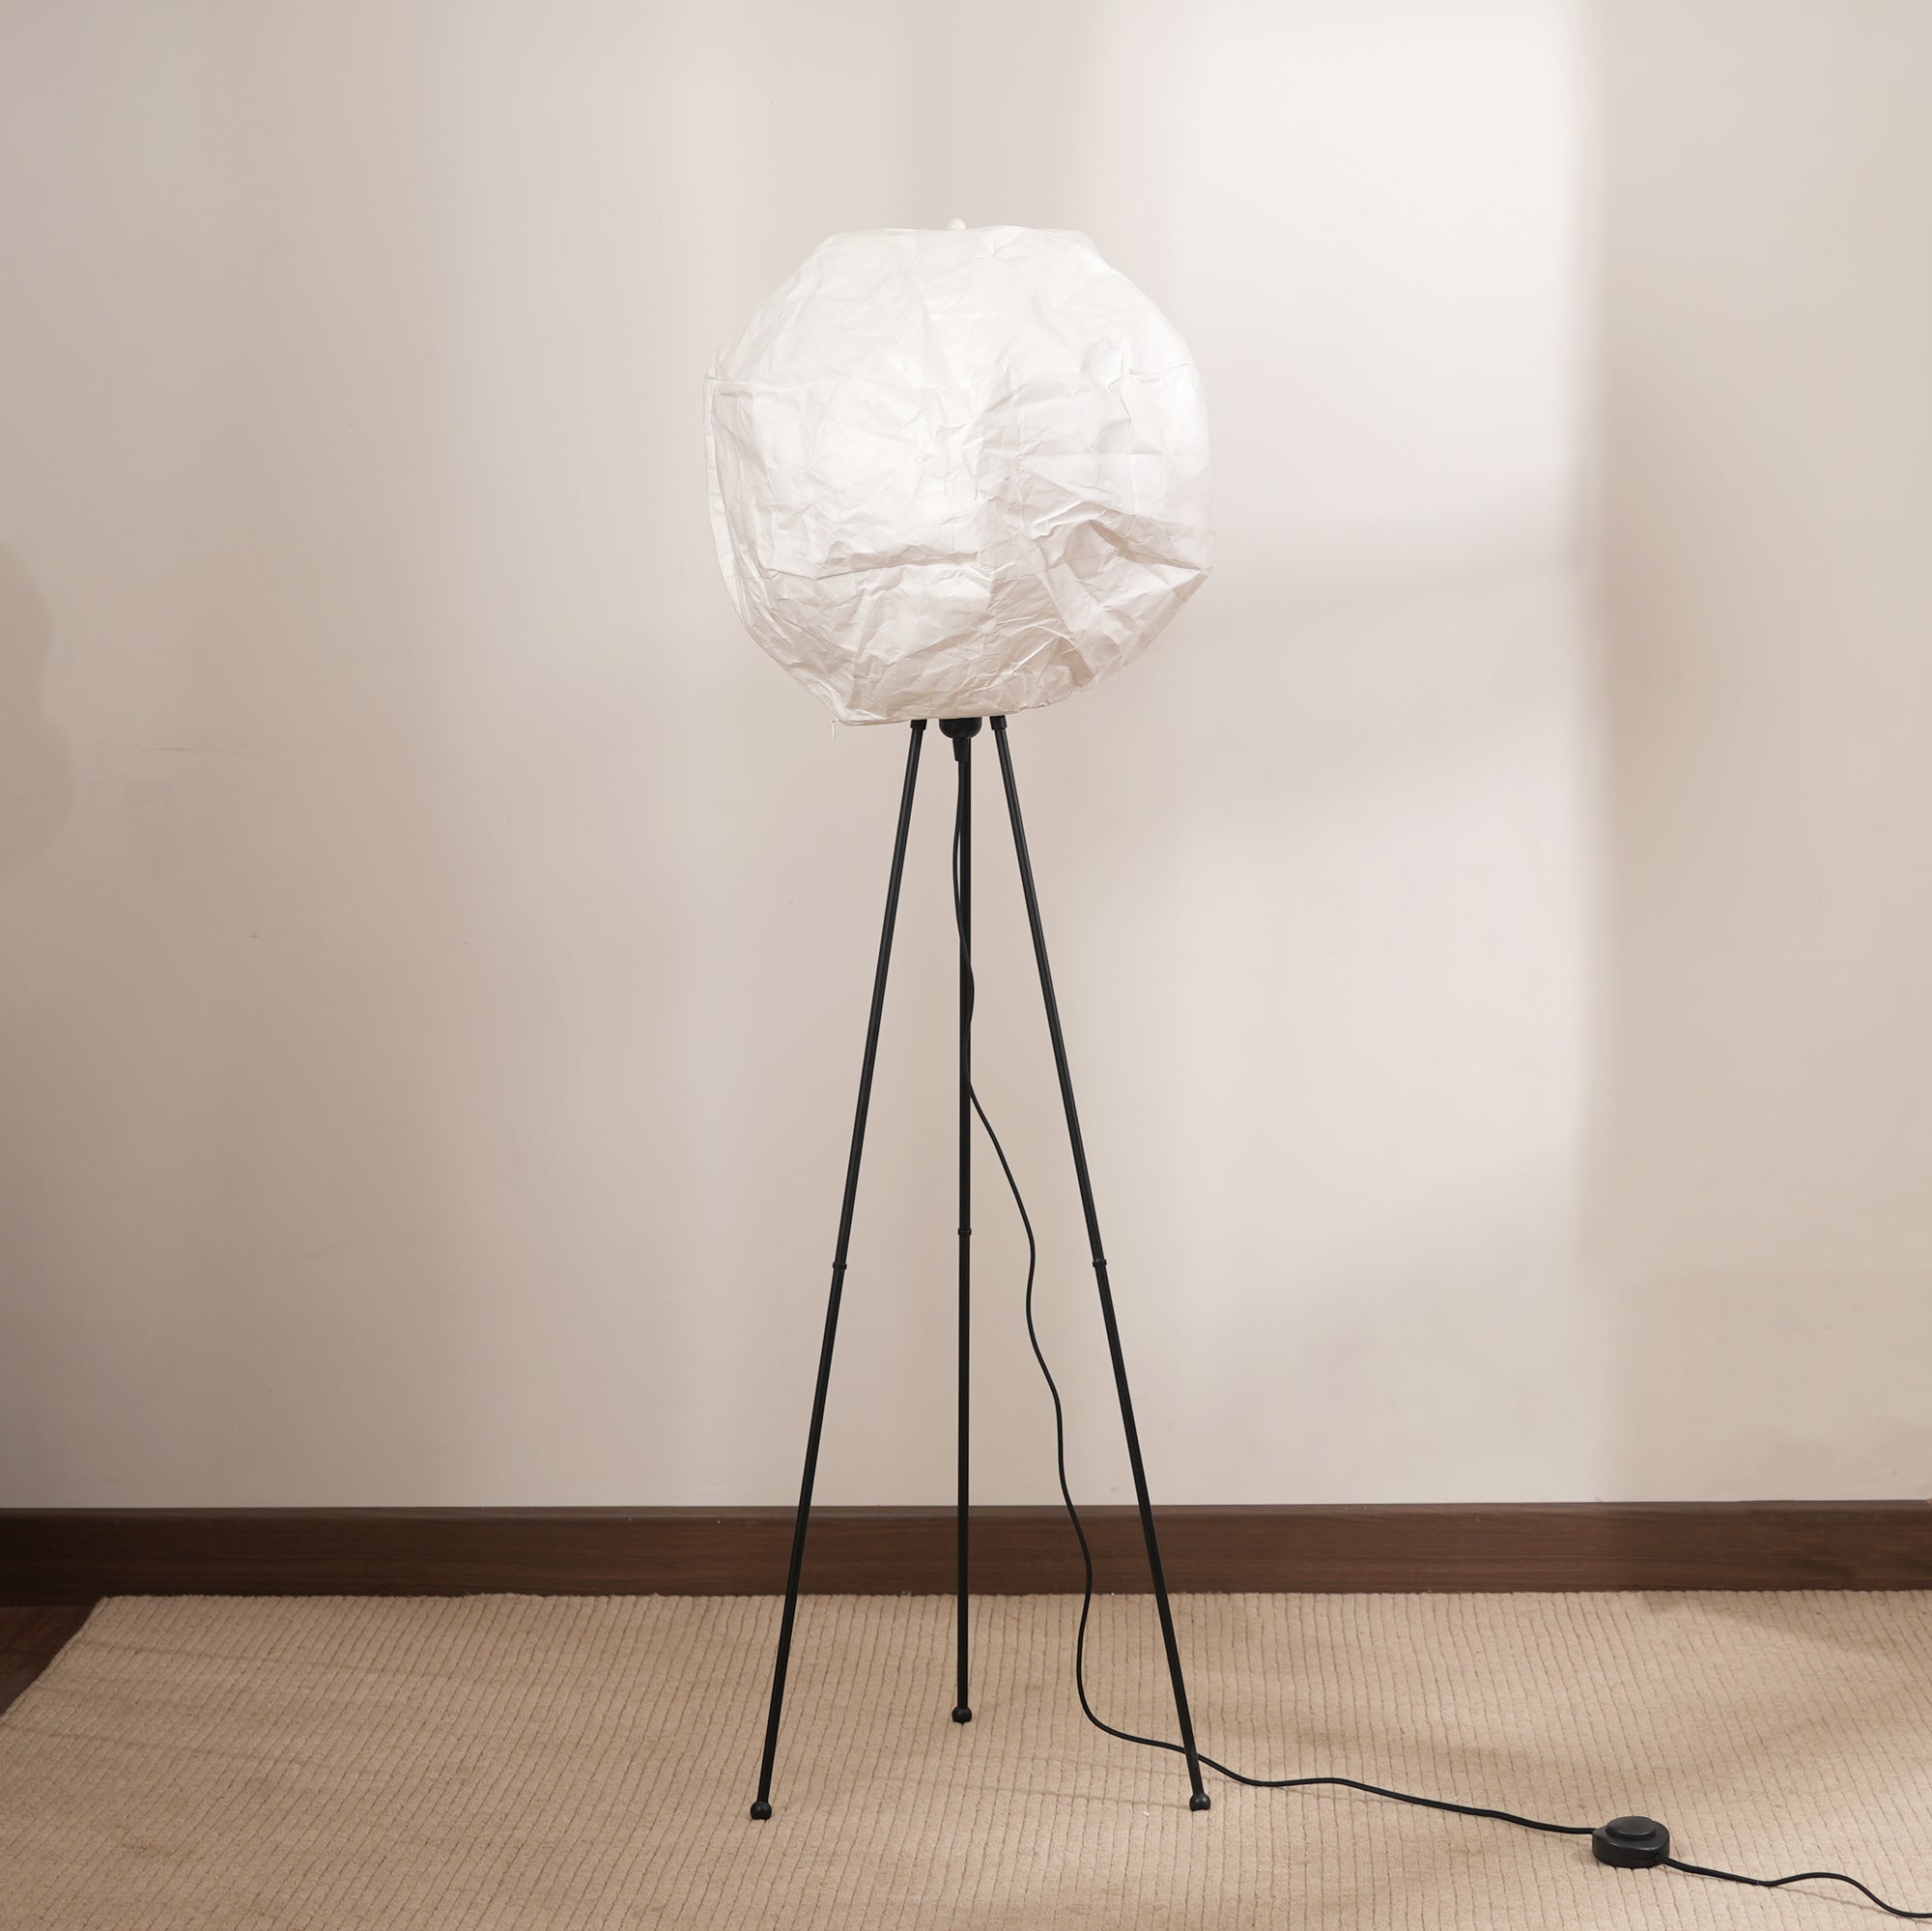 Luna Floor Lamp - Tripod Floor Lamp, Innovative Handcrafted Design, Recycled Polyethylene and Metal made standing light